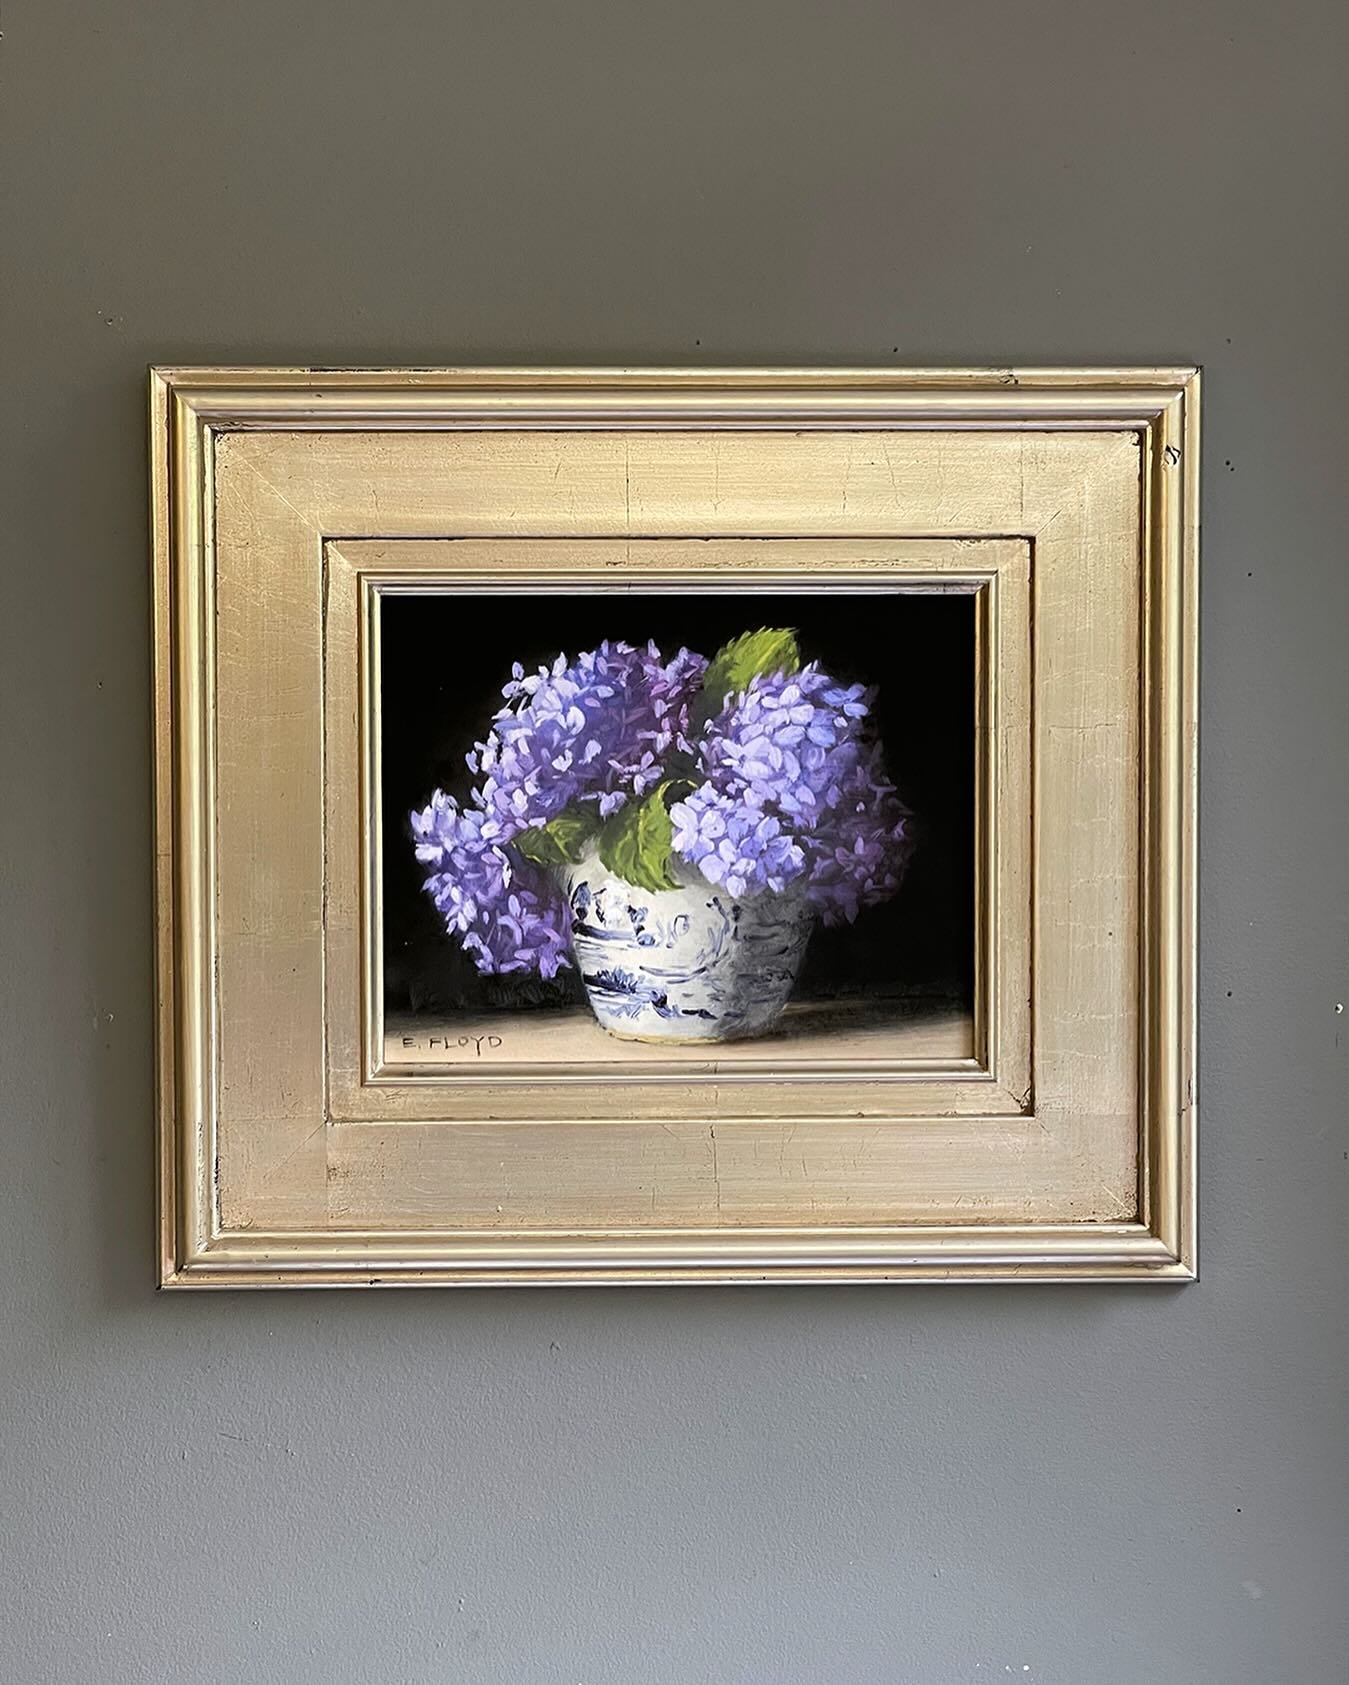 June&rsquo;s print! 💙⁠
⁠
&ldquo;Hydrangeas in Ginger Jar&rdquo; is now available as a fine art print.⁠
⁠
8&rdquo;x10&rdquo; print on 285gsm watercolor paper. Unframed. ⁠
⁠
I love hydrangeas, the lacey feeling of them, and in this print they just see